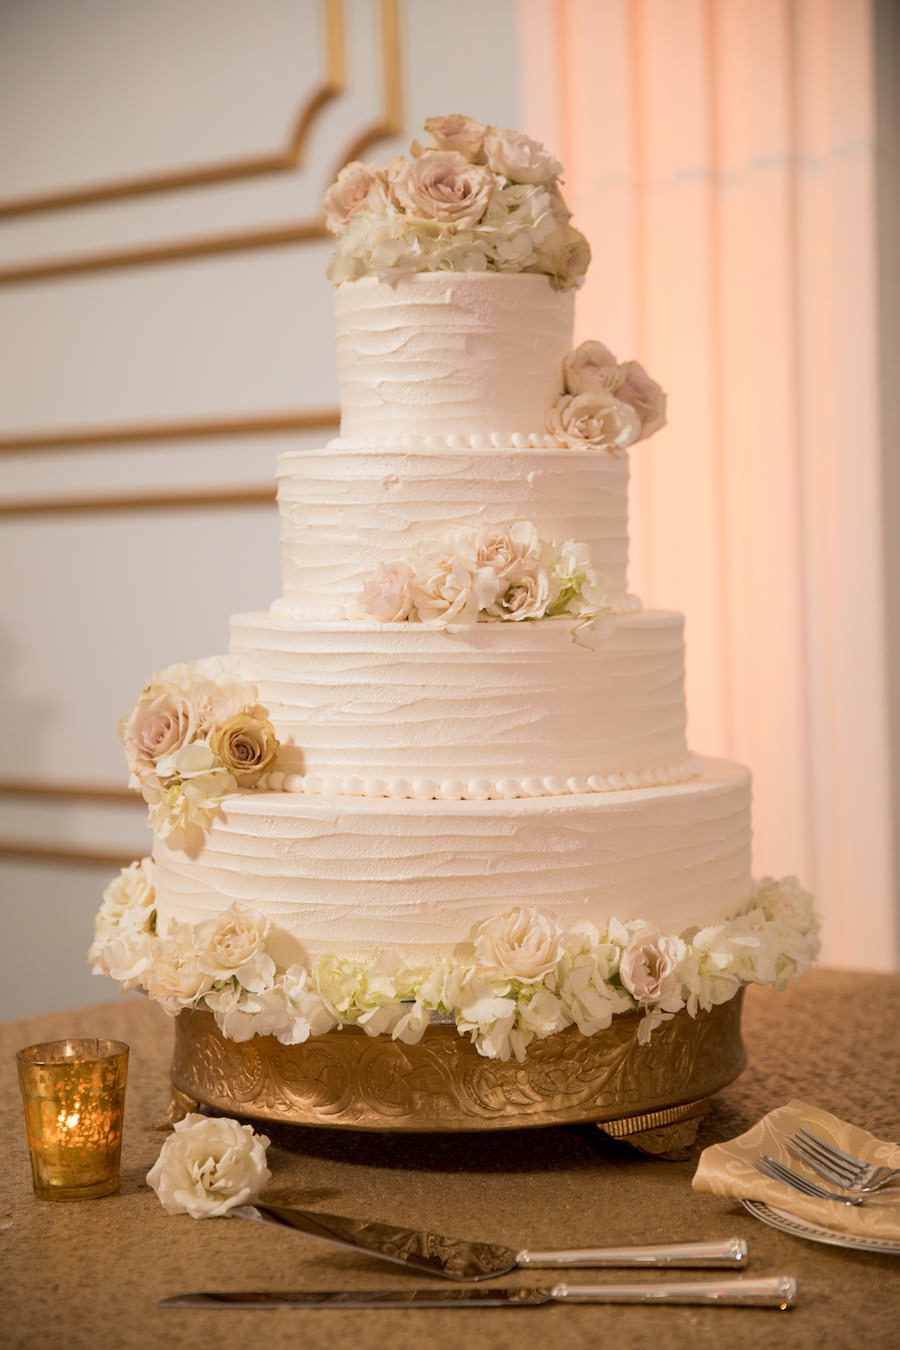 Four Tier Round White Wedding Cake with Blush and Ivory Roses on Gold Cake Stand